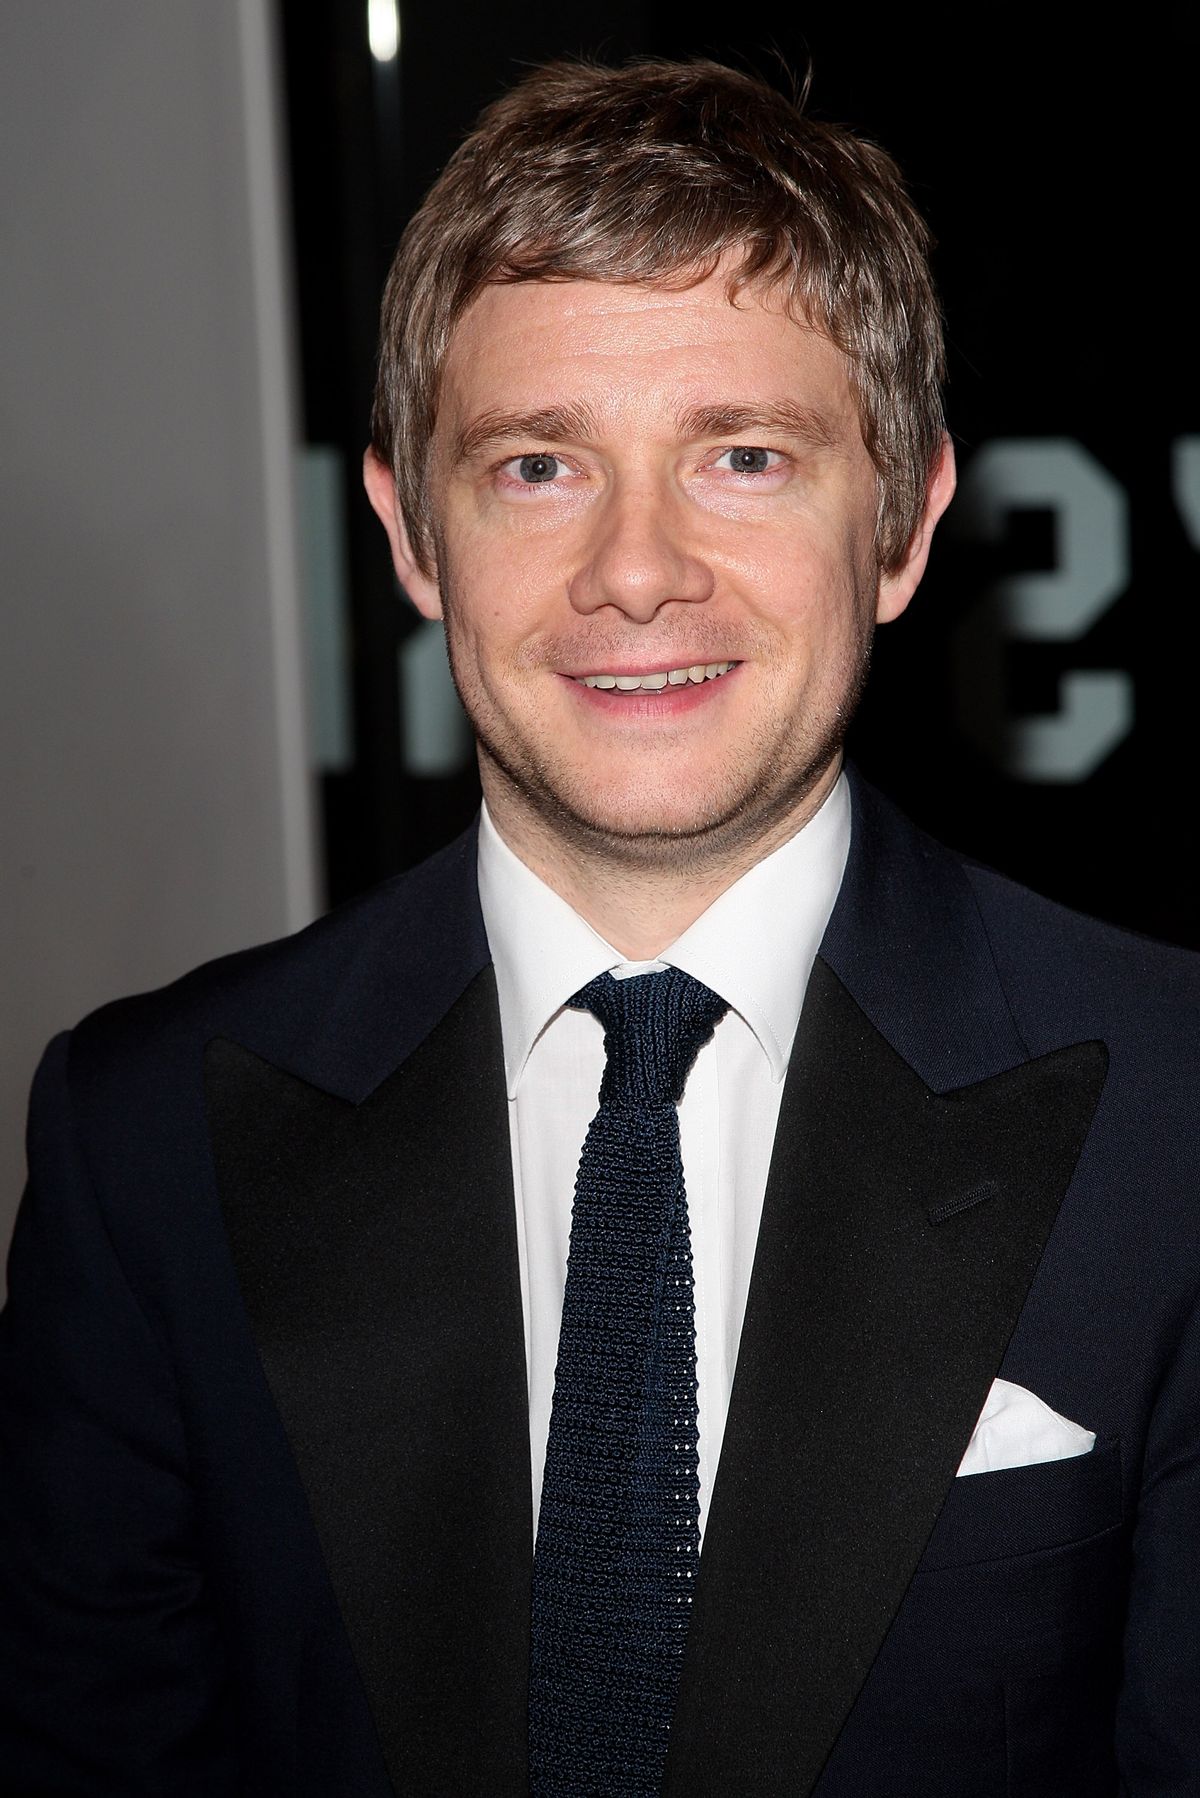 LONDON - OCTOBER 17:  (UK TABLOID NEWSPAPERS OUT) Actor Martin Freeman attends The Times BFI 51st London Film Festival opening night gala screening of "Eastern Promises" at Odeon Leicester Square on October 17, 2007 in London, England.  (Photo by Dave Hogan/Getty Images) (Getty Images)